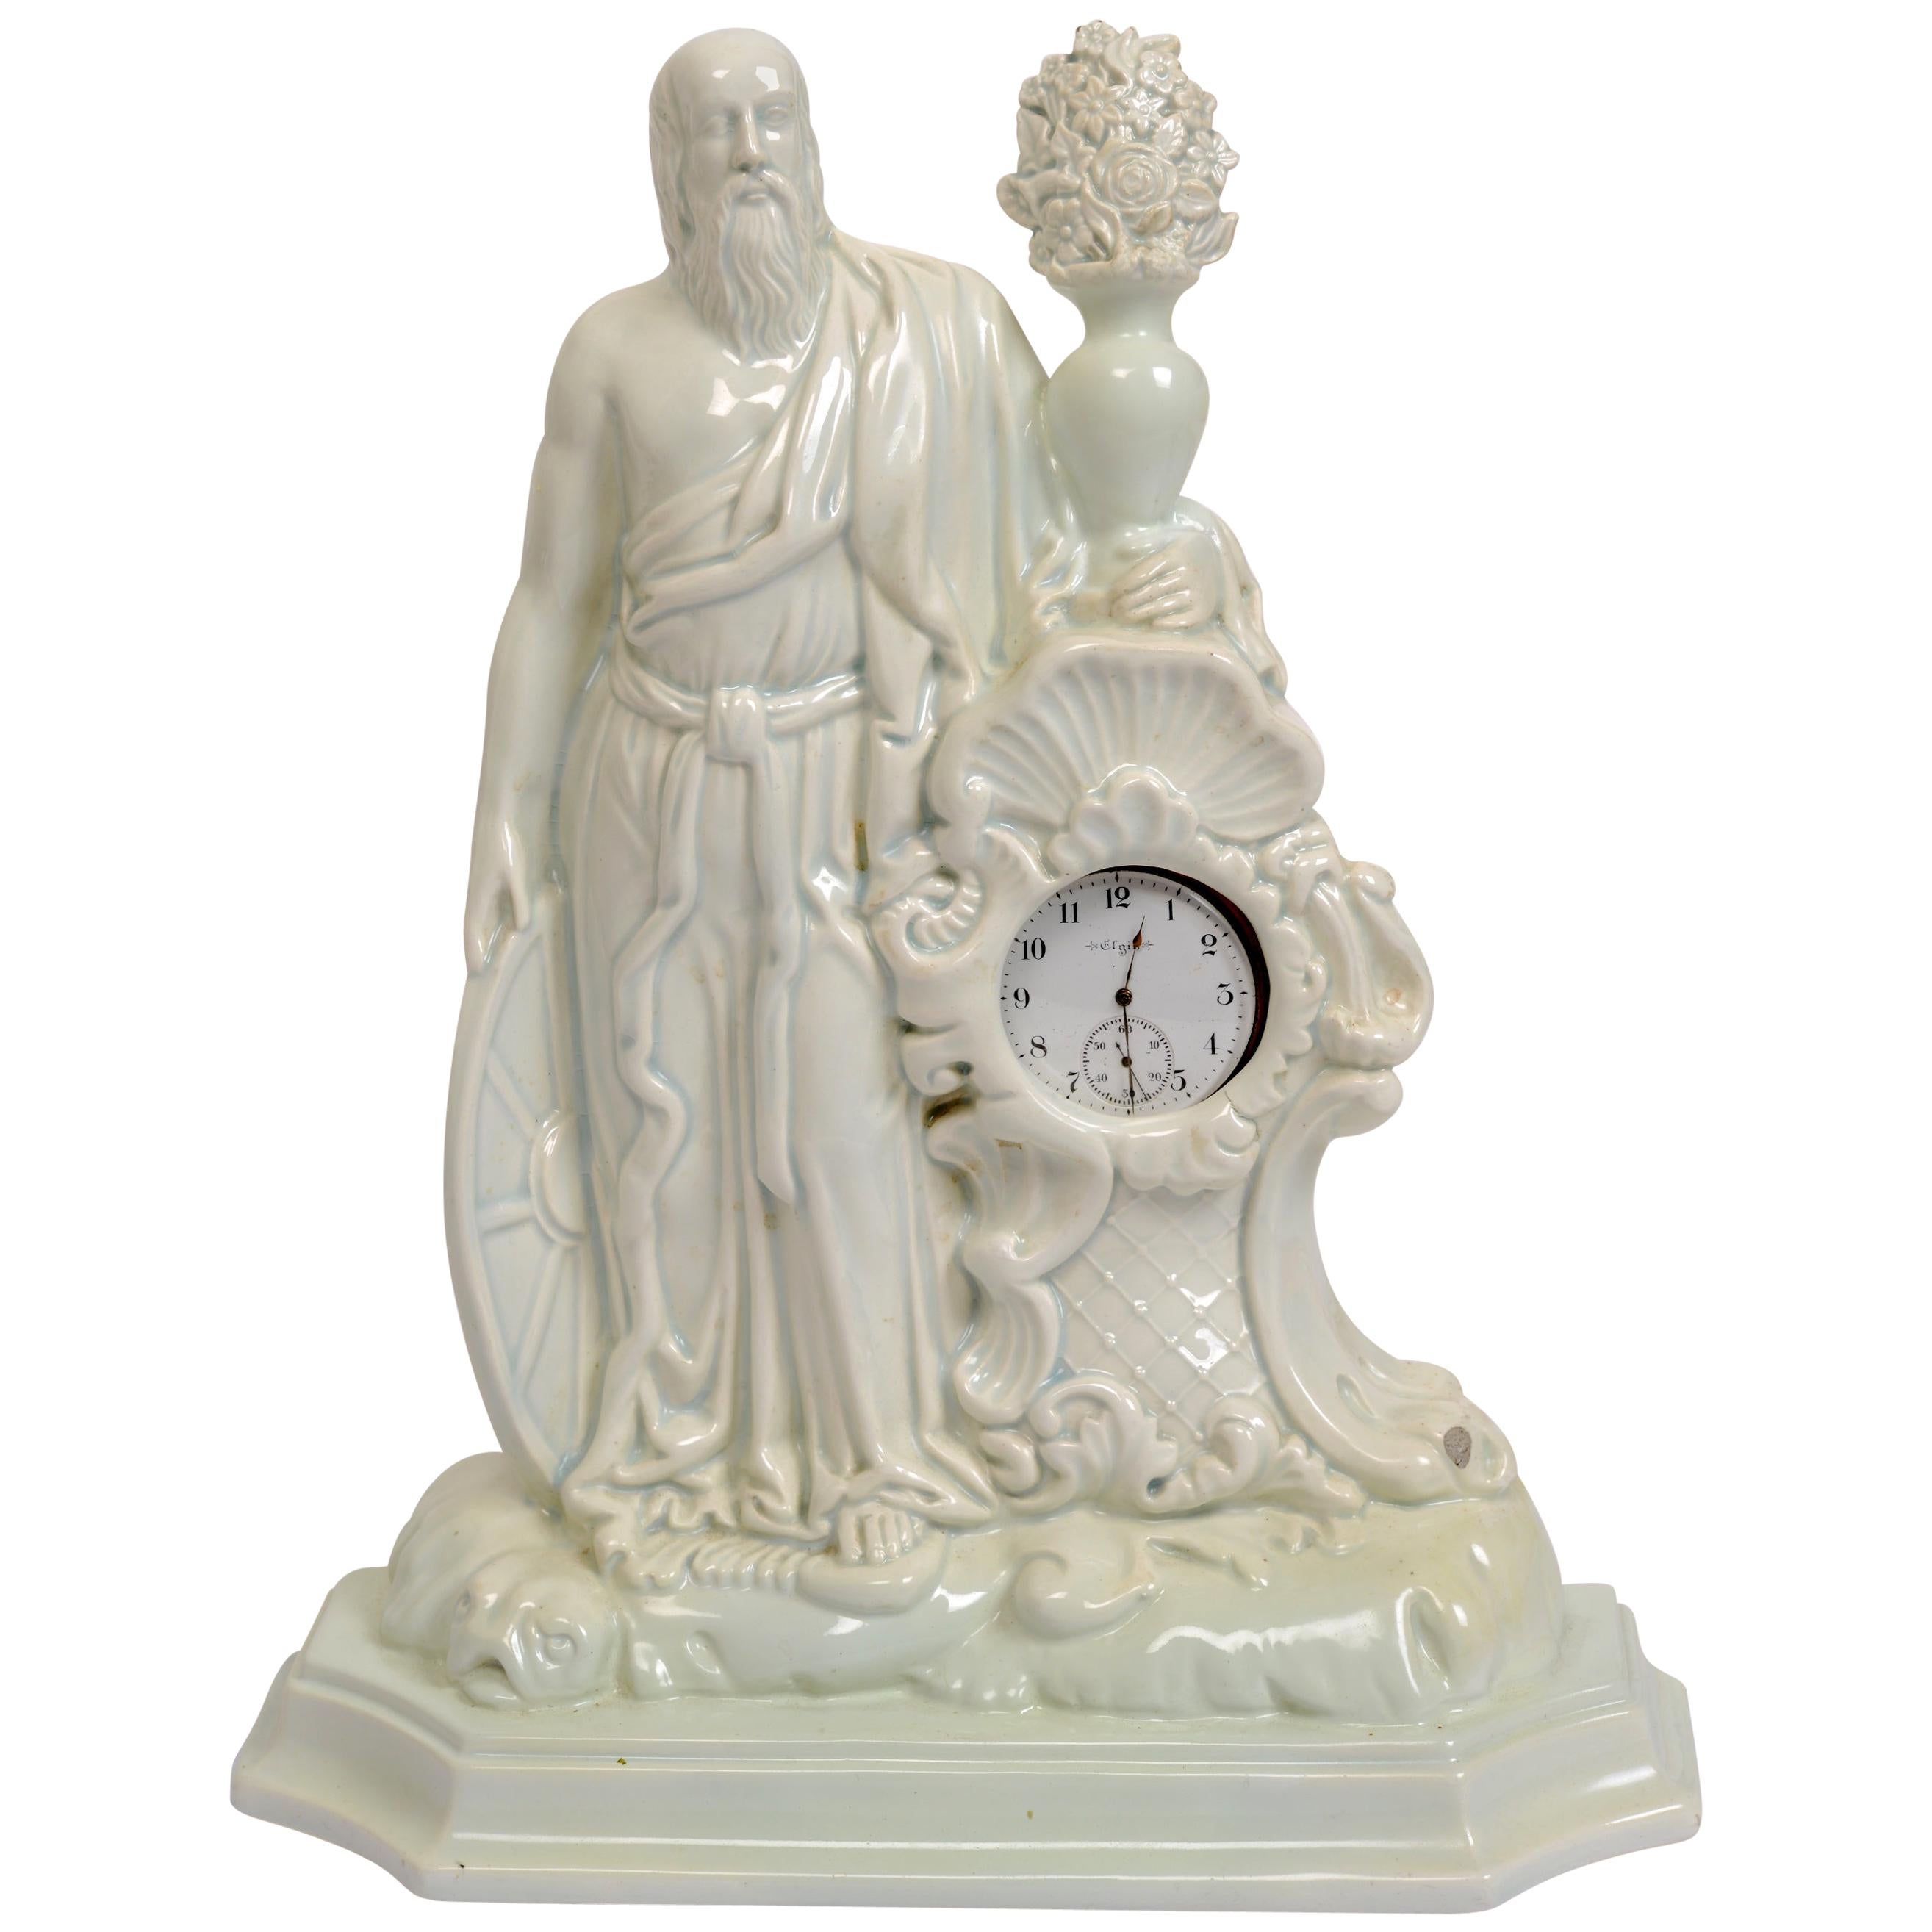 Italian, Late 18th Century Watch Holder with Father Time